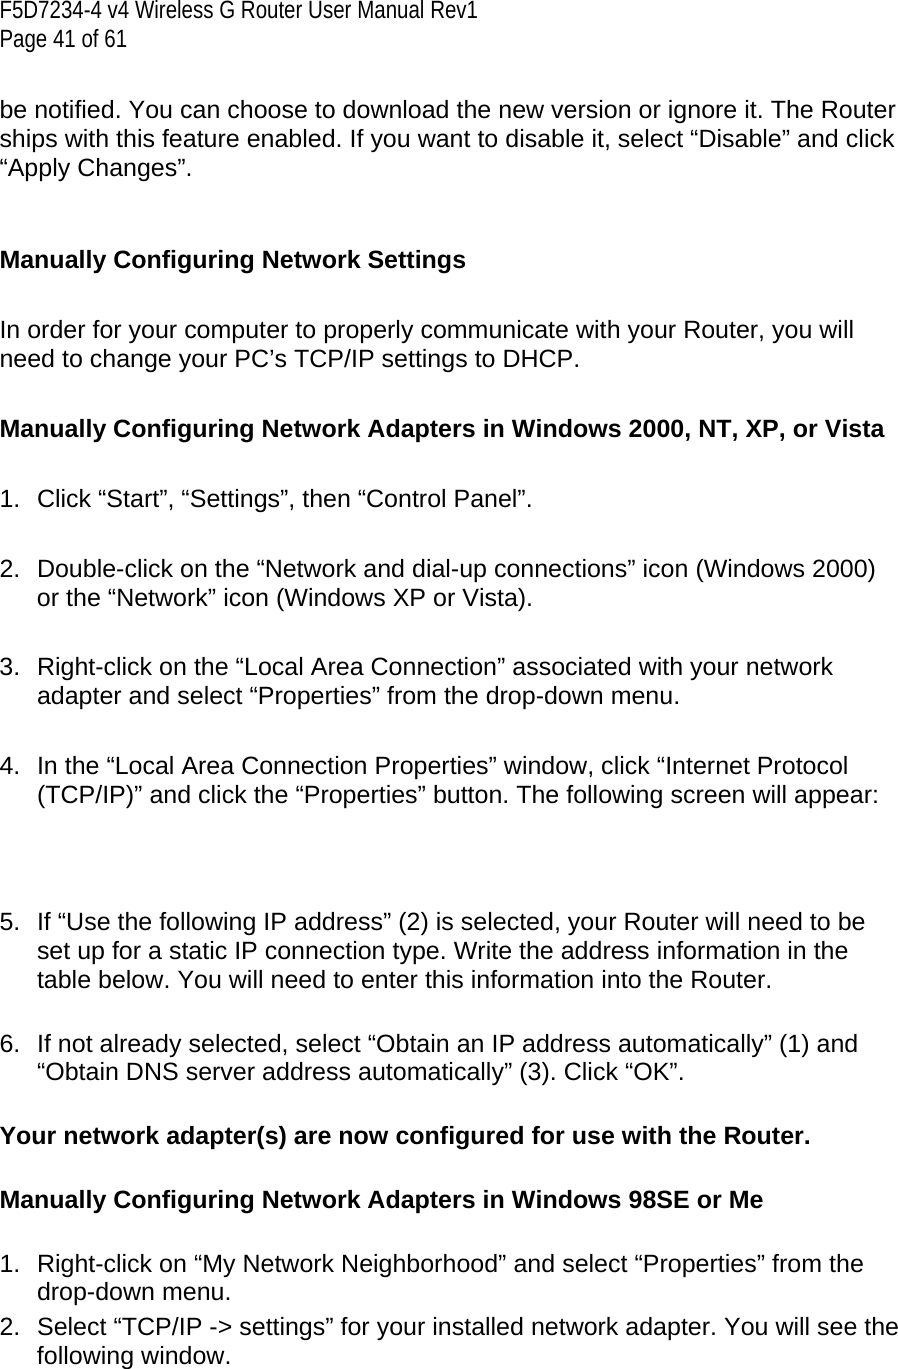 F5D7234-4 v4 Wireless G Router User Manual Rev1  Page 41 of 61   be notified. You can choose to download the new version or ignore it. The Router ships with this feature enabled. If you want to disable it, select “Disable” and click “Apply Changes”.   Manually Configuring Network Settings   In order for your computer to properly communicate with your Router, you will need to change your PC’s TCP/IP settings to DHCP.   Manually Configuring Network Adapters in Windows 2000, NT, XP, or Vista   1.  Click “Start”, “Settings”, then “Control Panel”.  2.  Double-click on the “Network and dial-up connections” icon (Windows 2000) or the “Network” icon (Windows XP or Vista).  3.  Right-click on the “Local Area Connection” associated with your network adapter and select “Properties” from the drop-down menu.  4.  In the “Local Area Connection Properties” window, click “Internet Protocol (TCP/IP)” and click the “Properties” button. The following screen will appear:    5.  If “Use the following IP address” (2) is selected, your Router will need to be set up for a static IP connection type. Write the address information in the table below. You will need to enter this information into the Router.  6.  If not already selected, select “Obtain an IP address automatically” (1) and “Obtain DNS server address automatically” (3). Click “OK”.  Your network adapter(s) are now configured for use with the Router.   Manually Configuring Network Adapters in Windows 98SE or Me  1.  Right-click on “My Network Neighborhood” and select “Properties” from the drop-down menu. 2.  Select “TCP/IP -&gt; settings” for your installed network adapter. You will see the following window.  